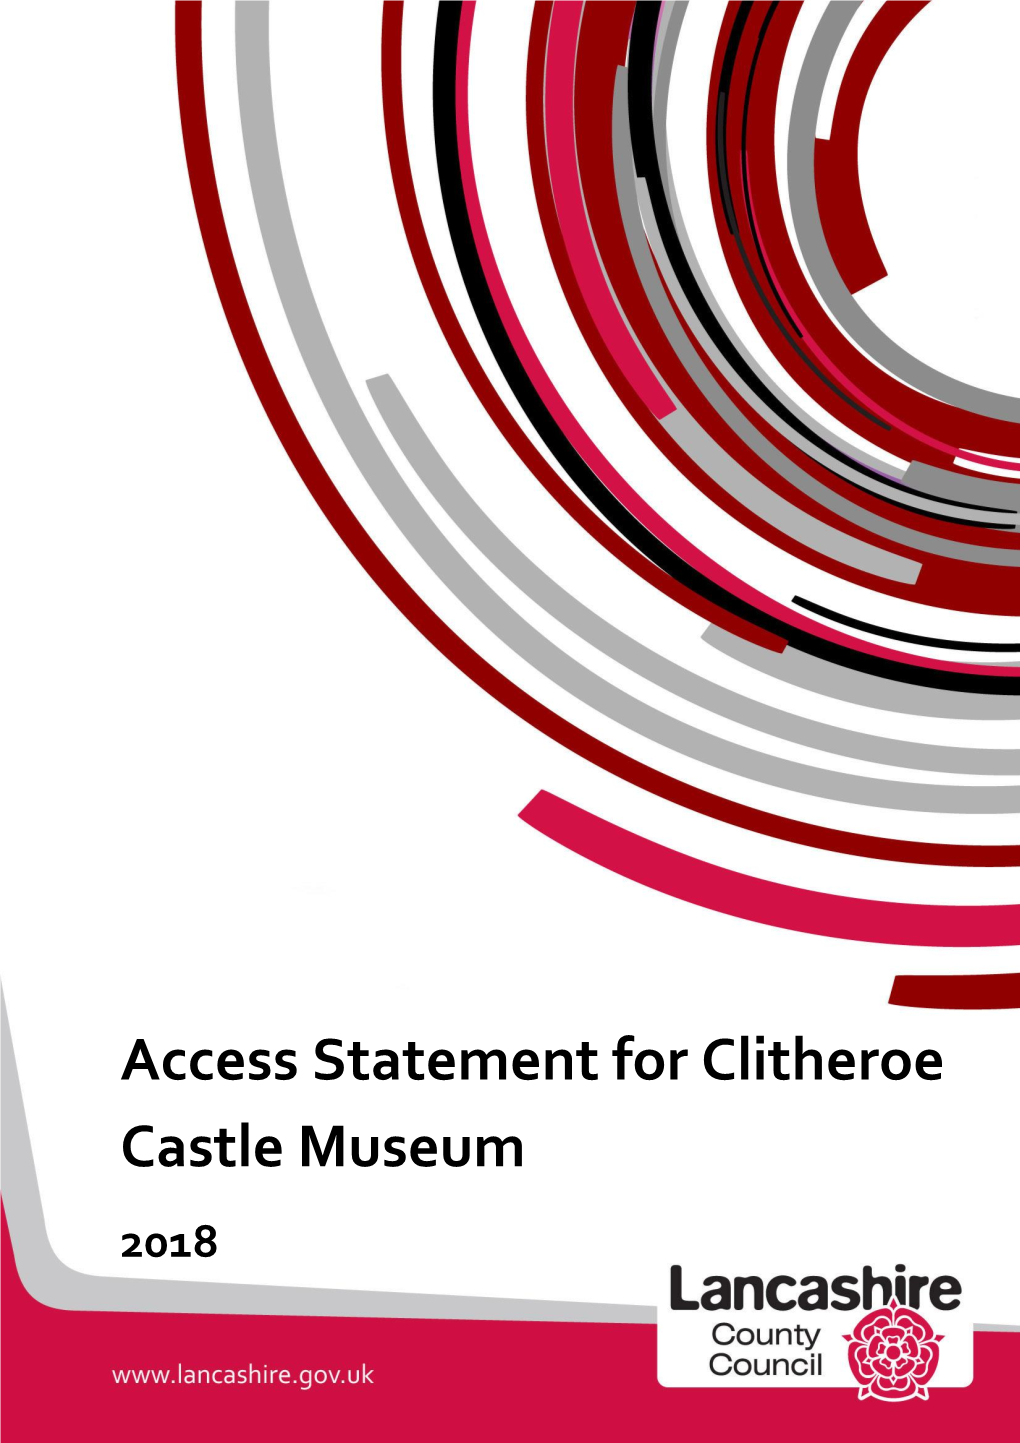 Access Statement for Clitheroe Castle Museum 2018